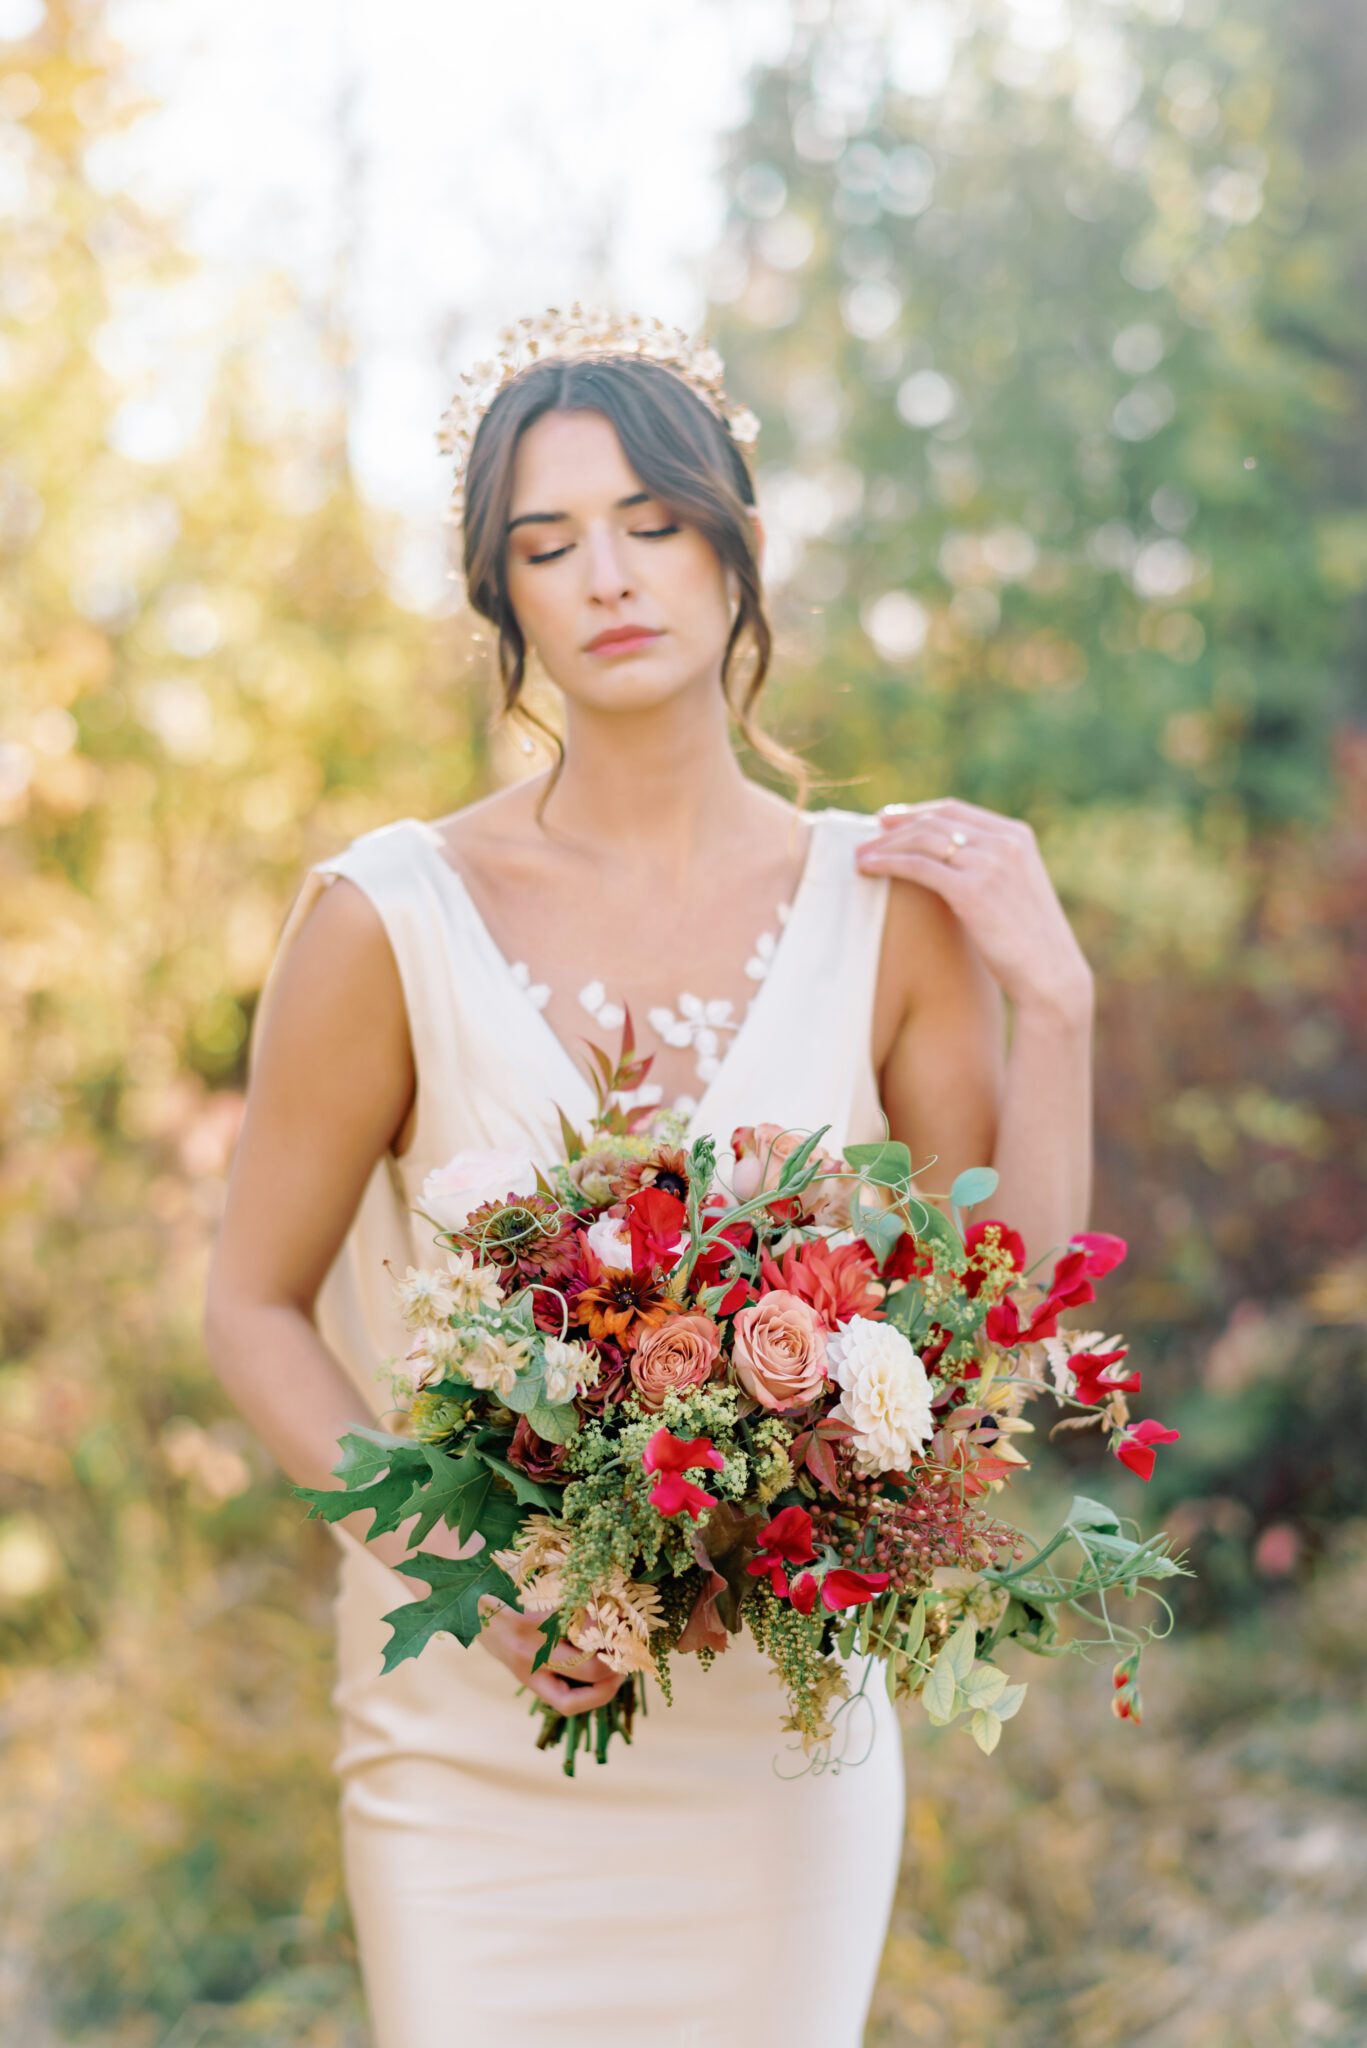 Bride wearing elegant champagne-toned satin wedding gown holding organic fall floral arrangements by Petal and Stem.